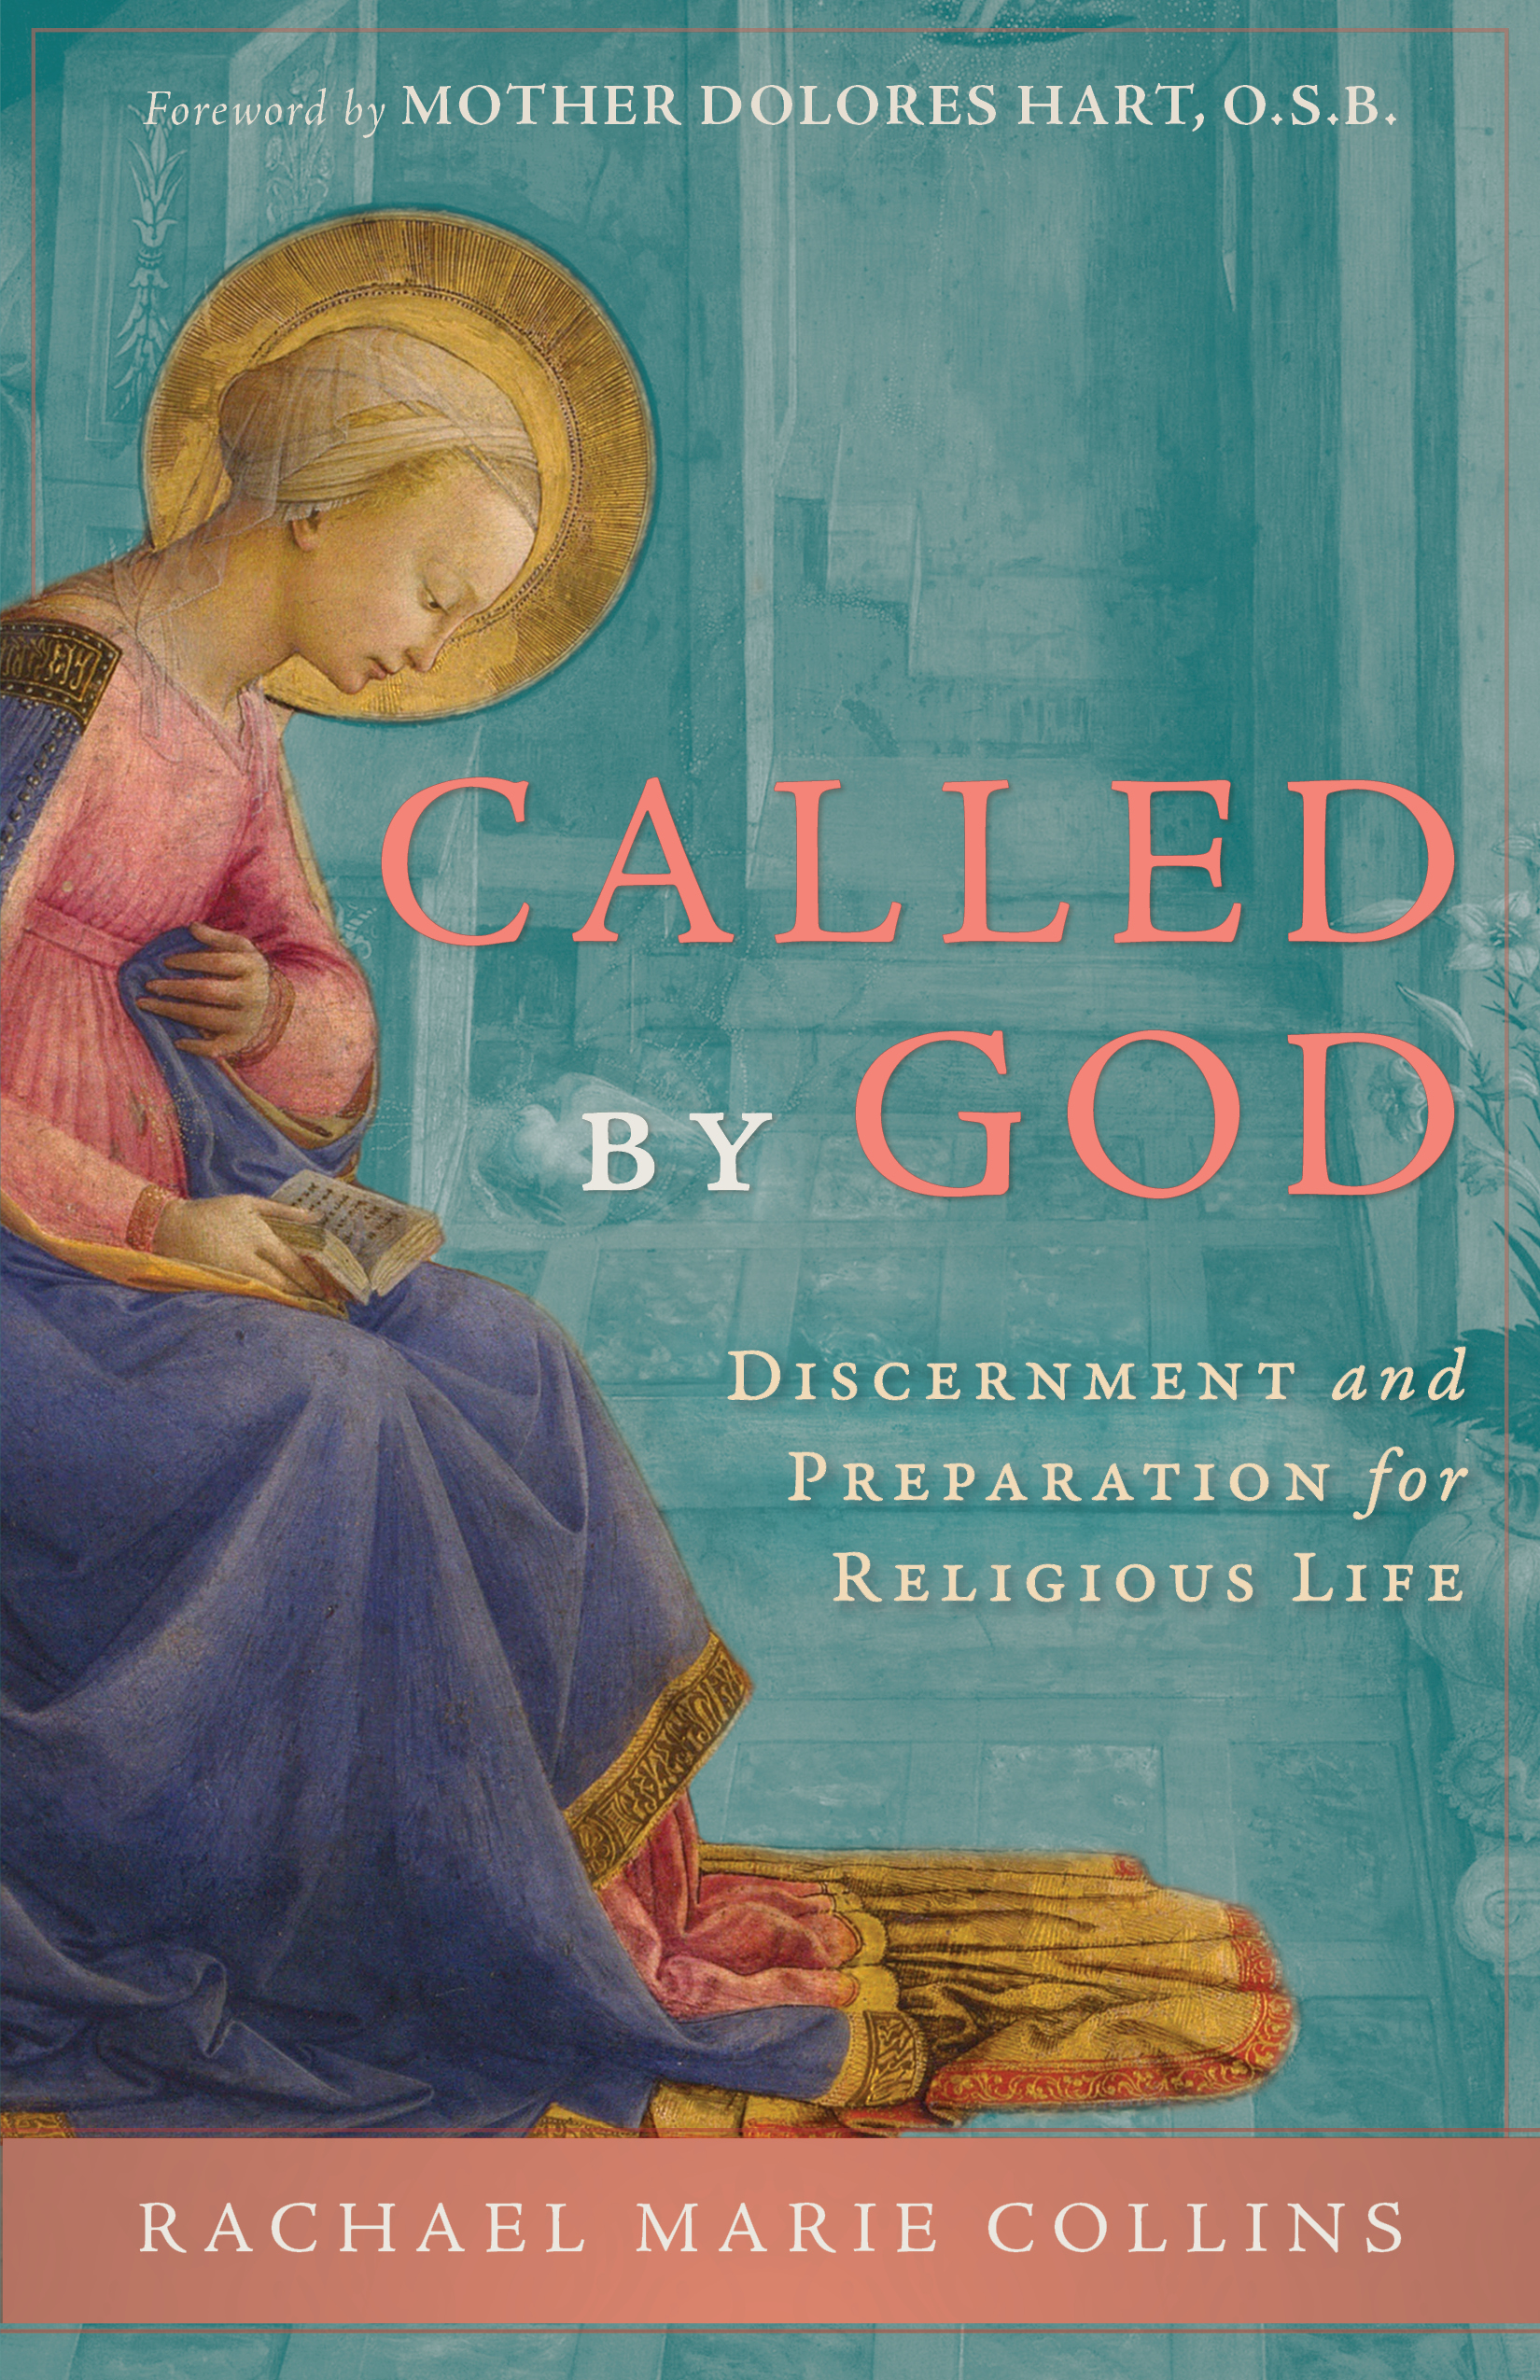 Foreword in: Catholicism and Religious Freedom